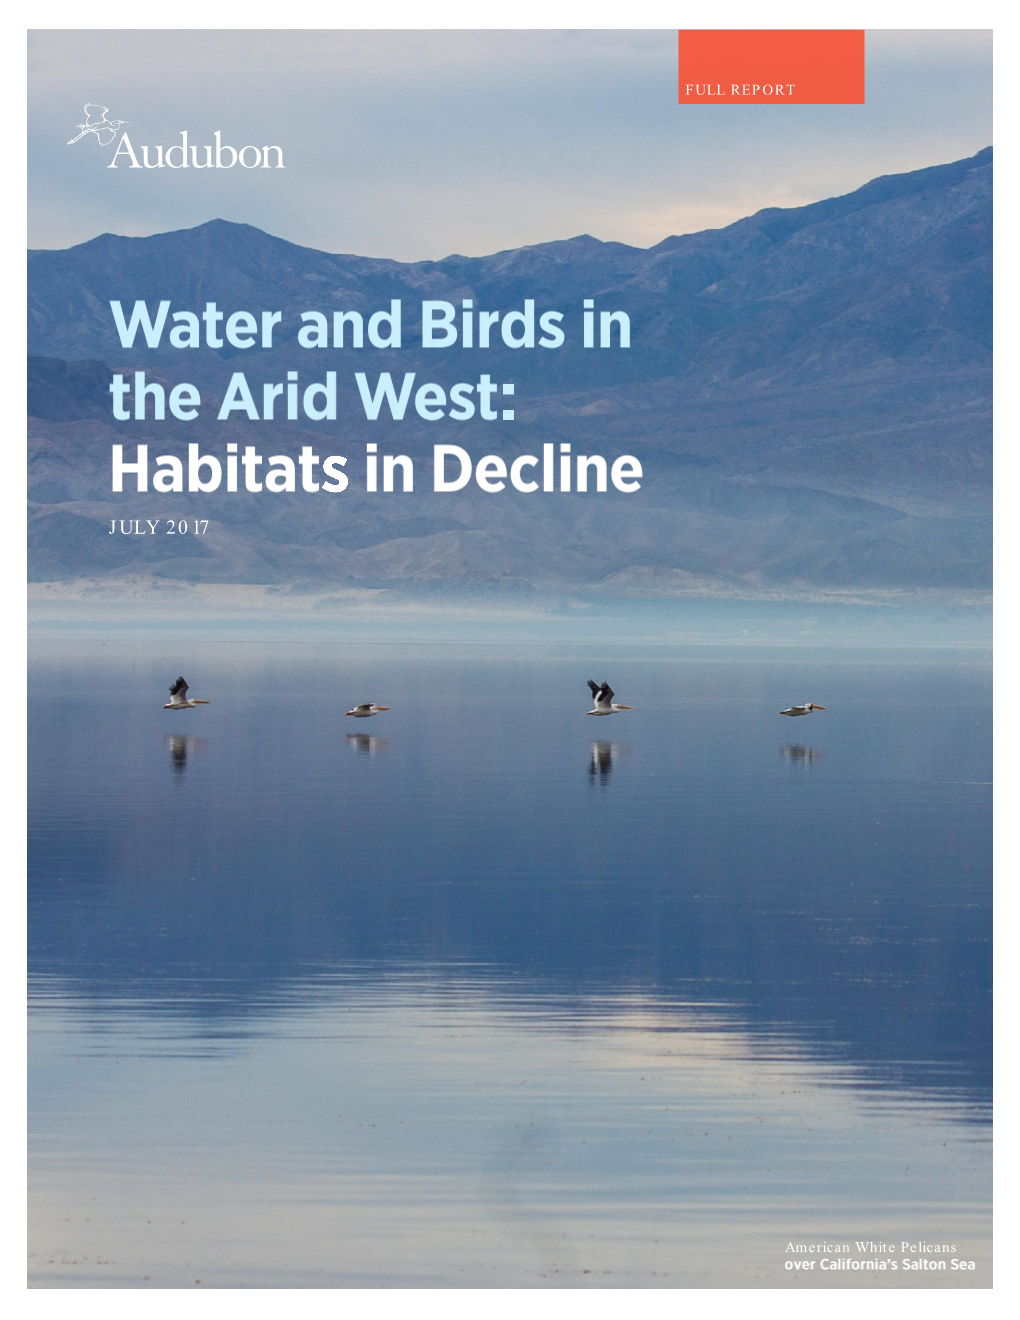 Water and Birds in the Arid West: Habitats in Decline